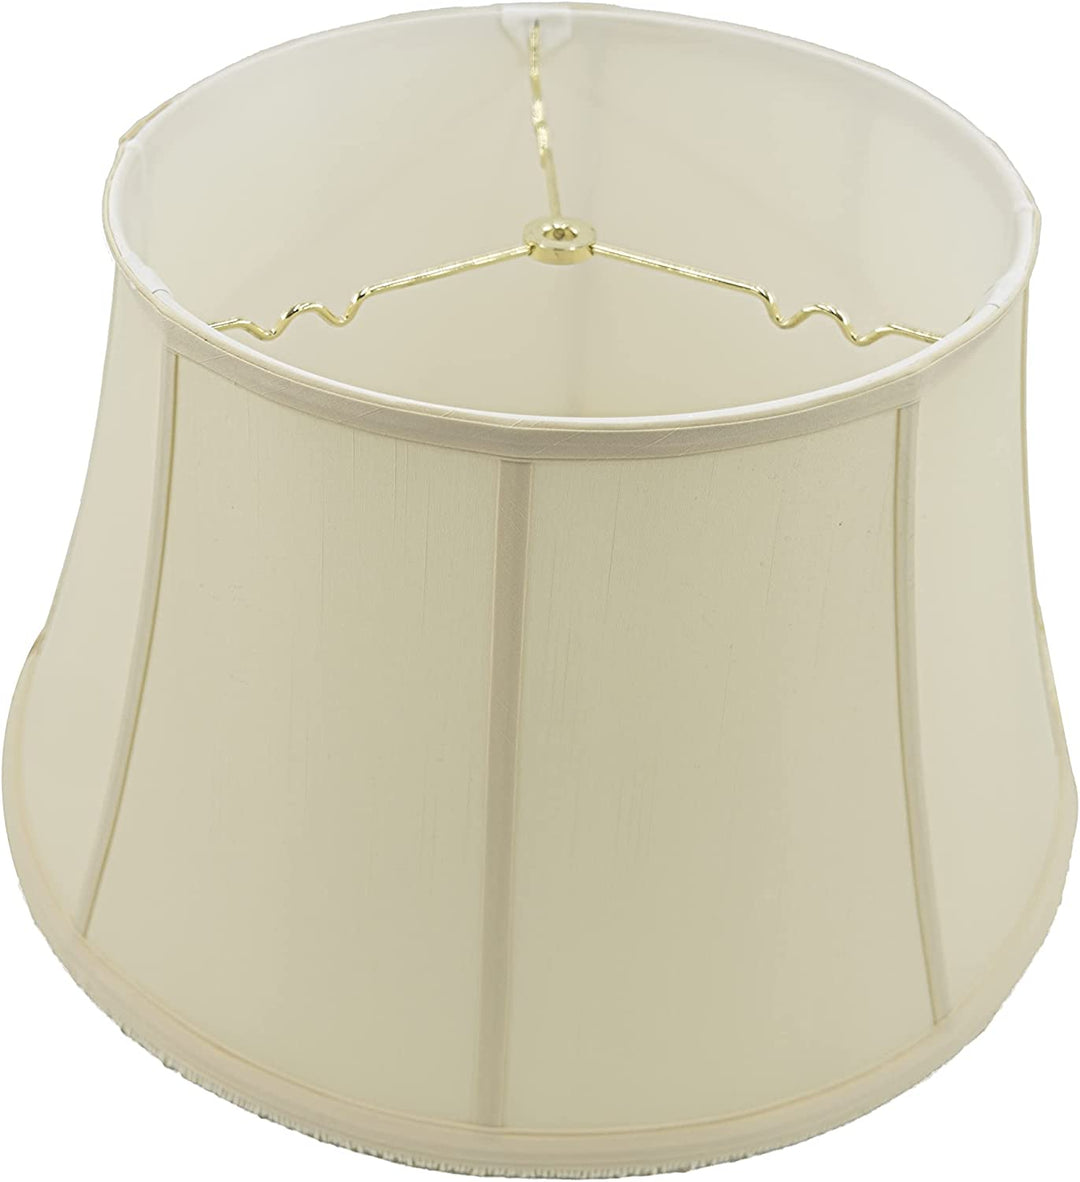 Shantung 19 Inch Modified Bell with Fringe Floor Lamp Shade (Eggshell)